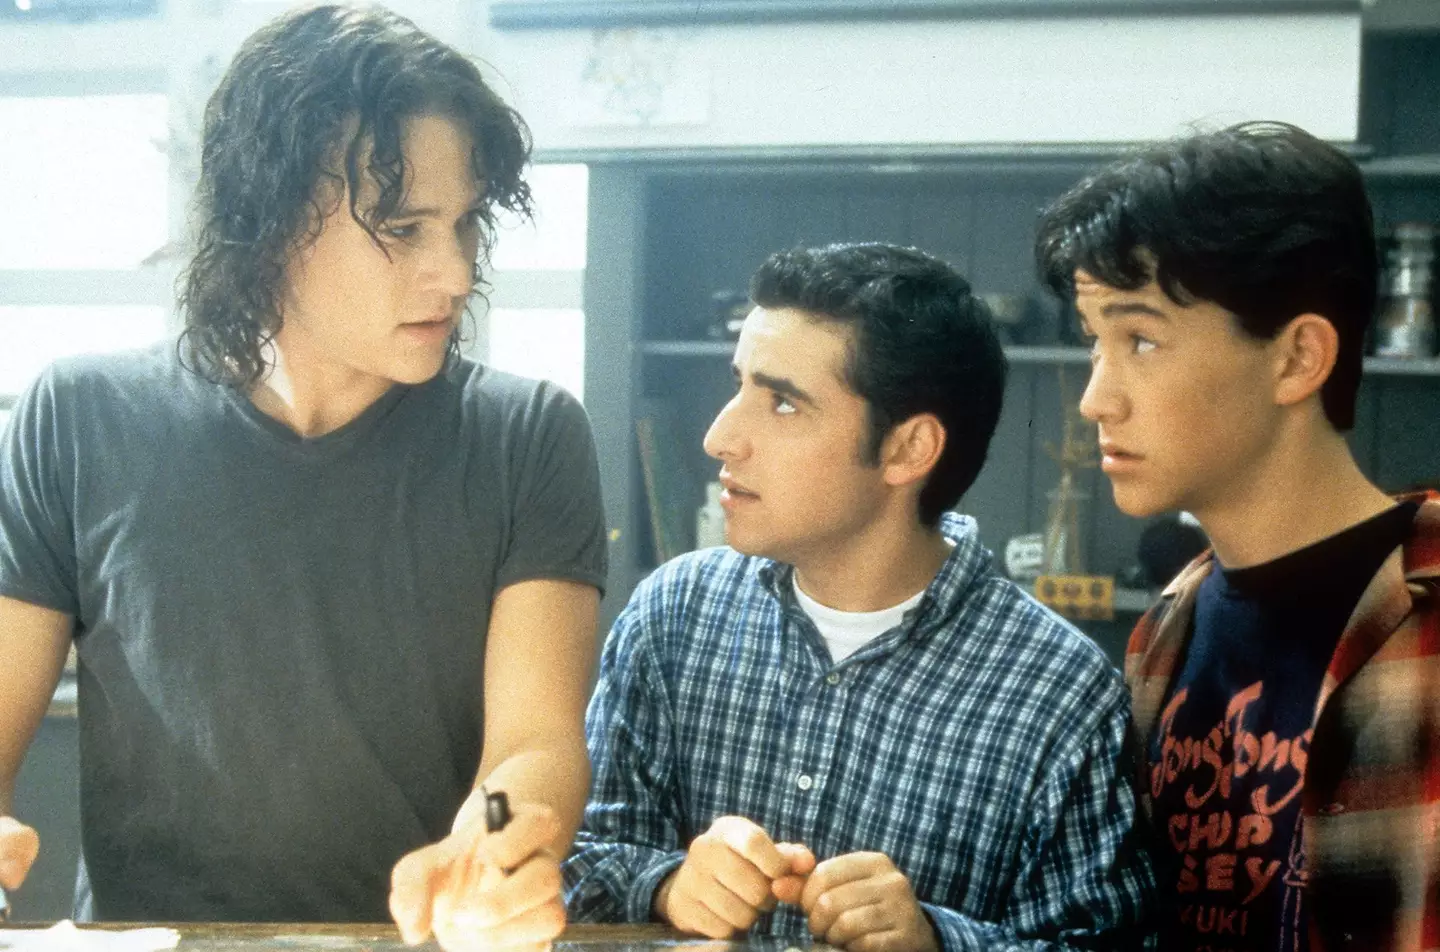 Heath Ledger is joined by a host of then-young talent who would go on to have impressive careers.